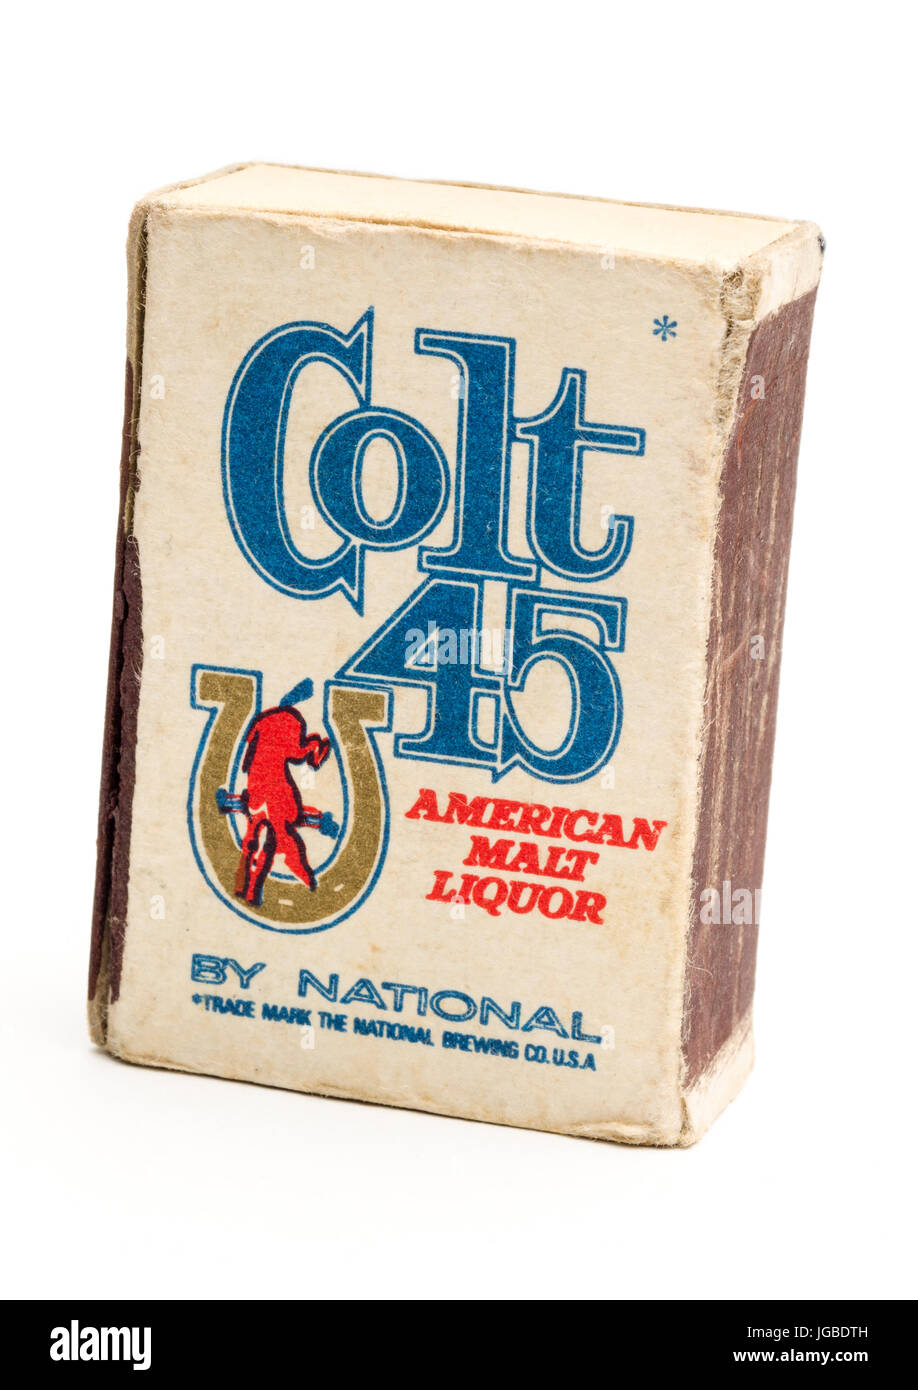 Box of Colt 45 Matches, Colt 45 is an American Malt Liquor made by the National Brewing Company since 1963. Stock Photo